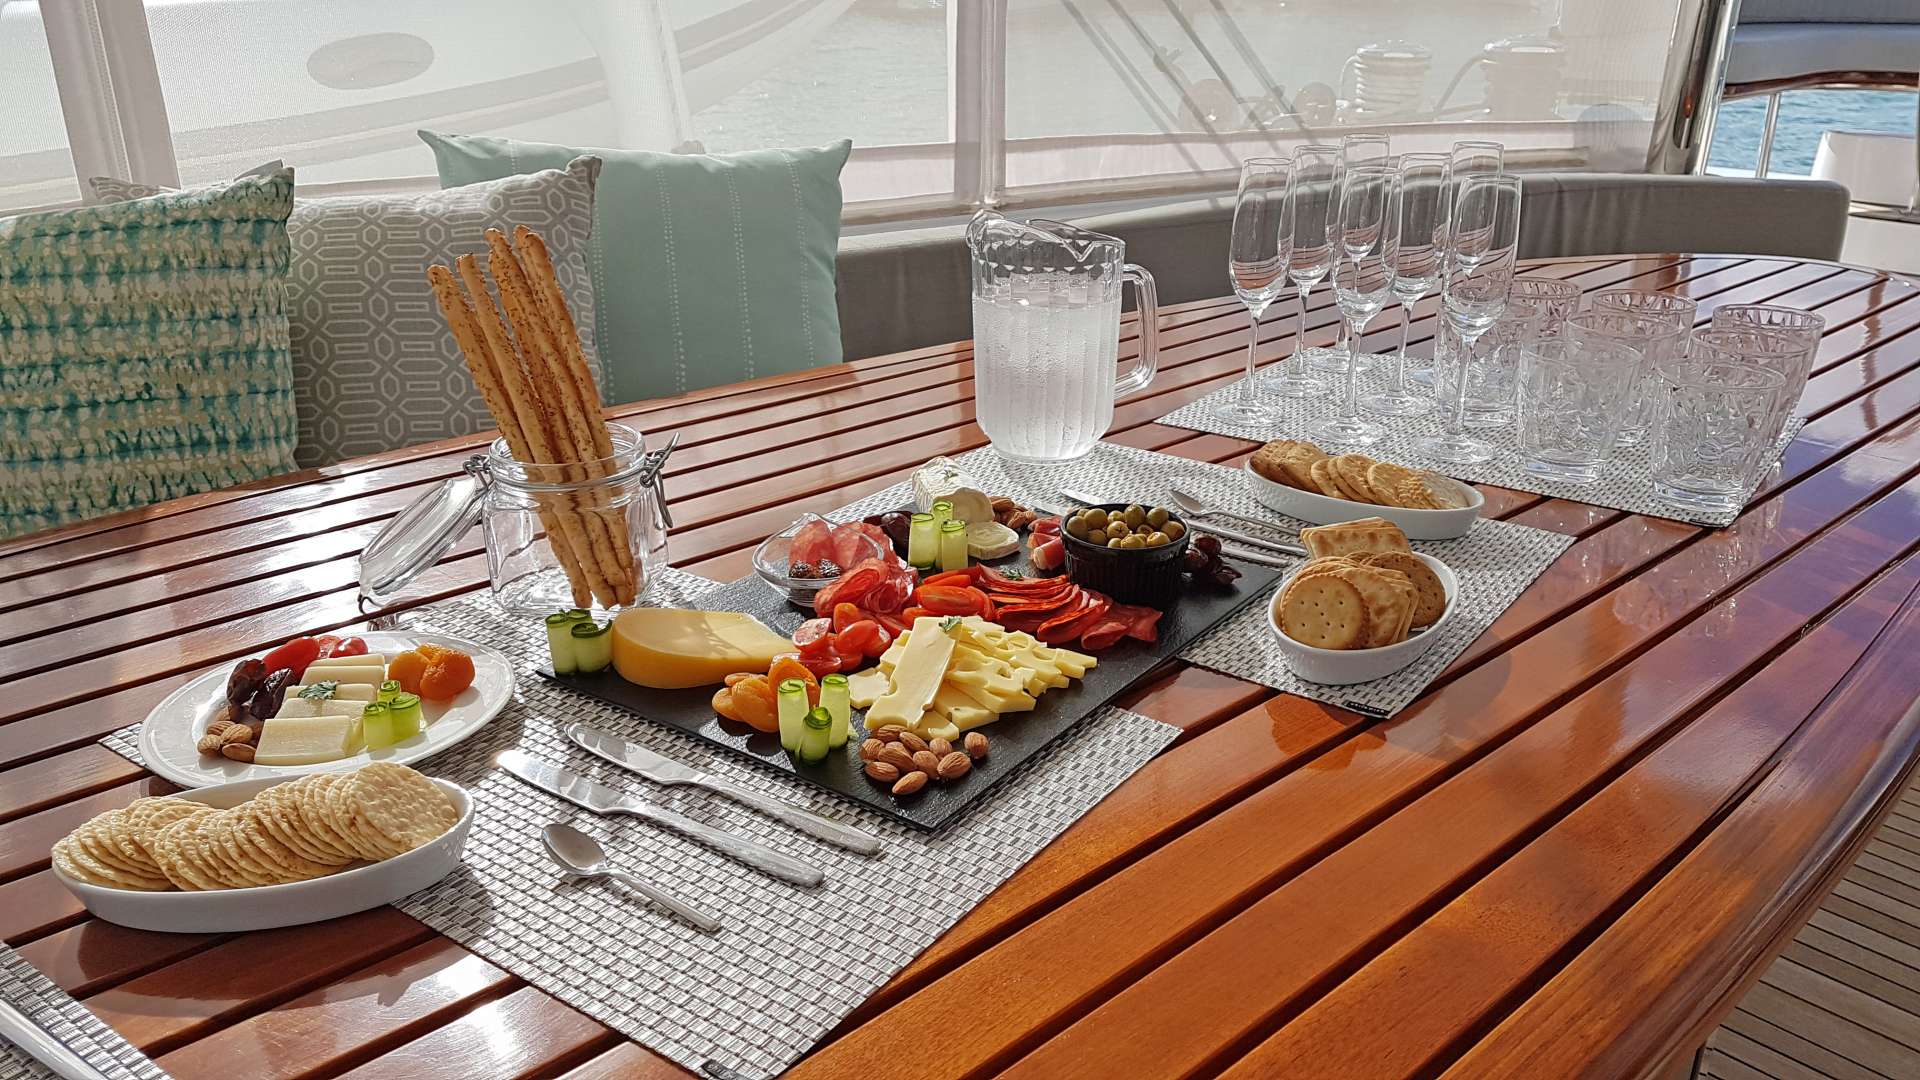 Hors d'oeuvres on Aft Deck